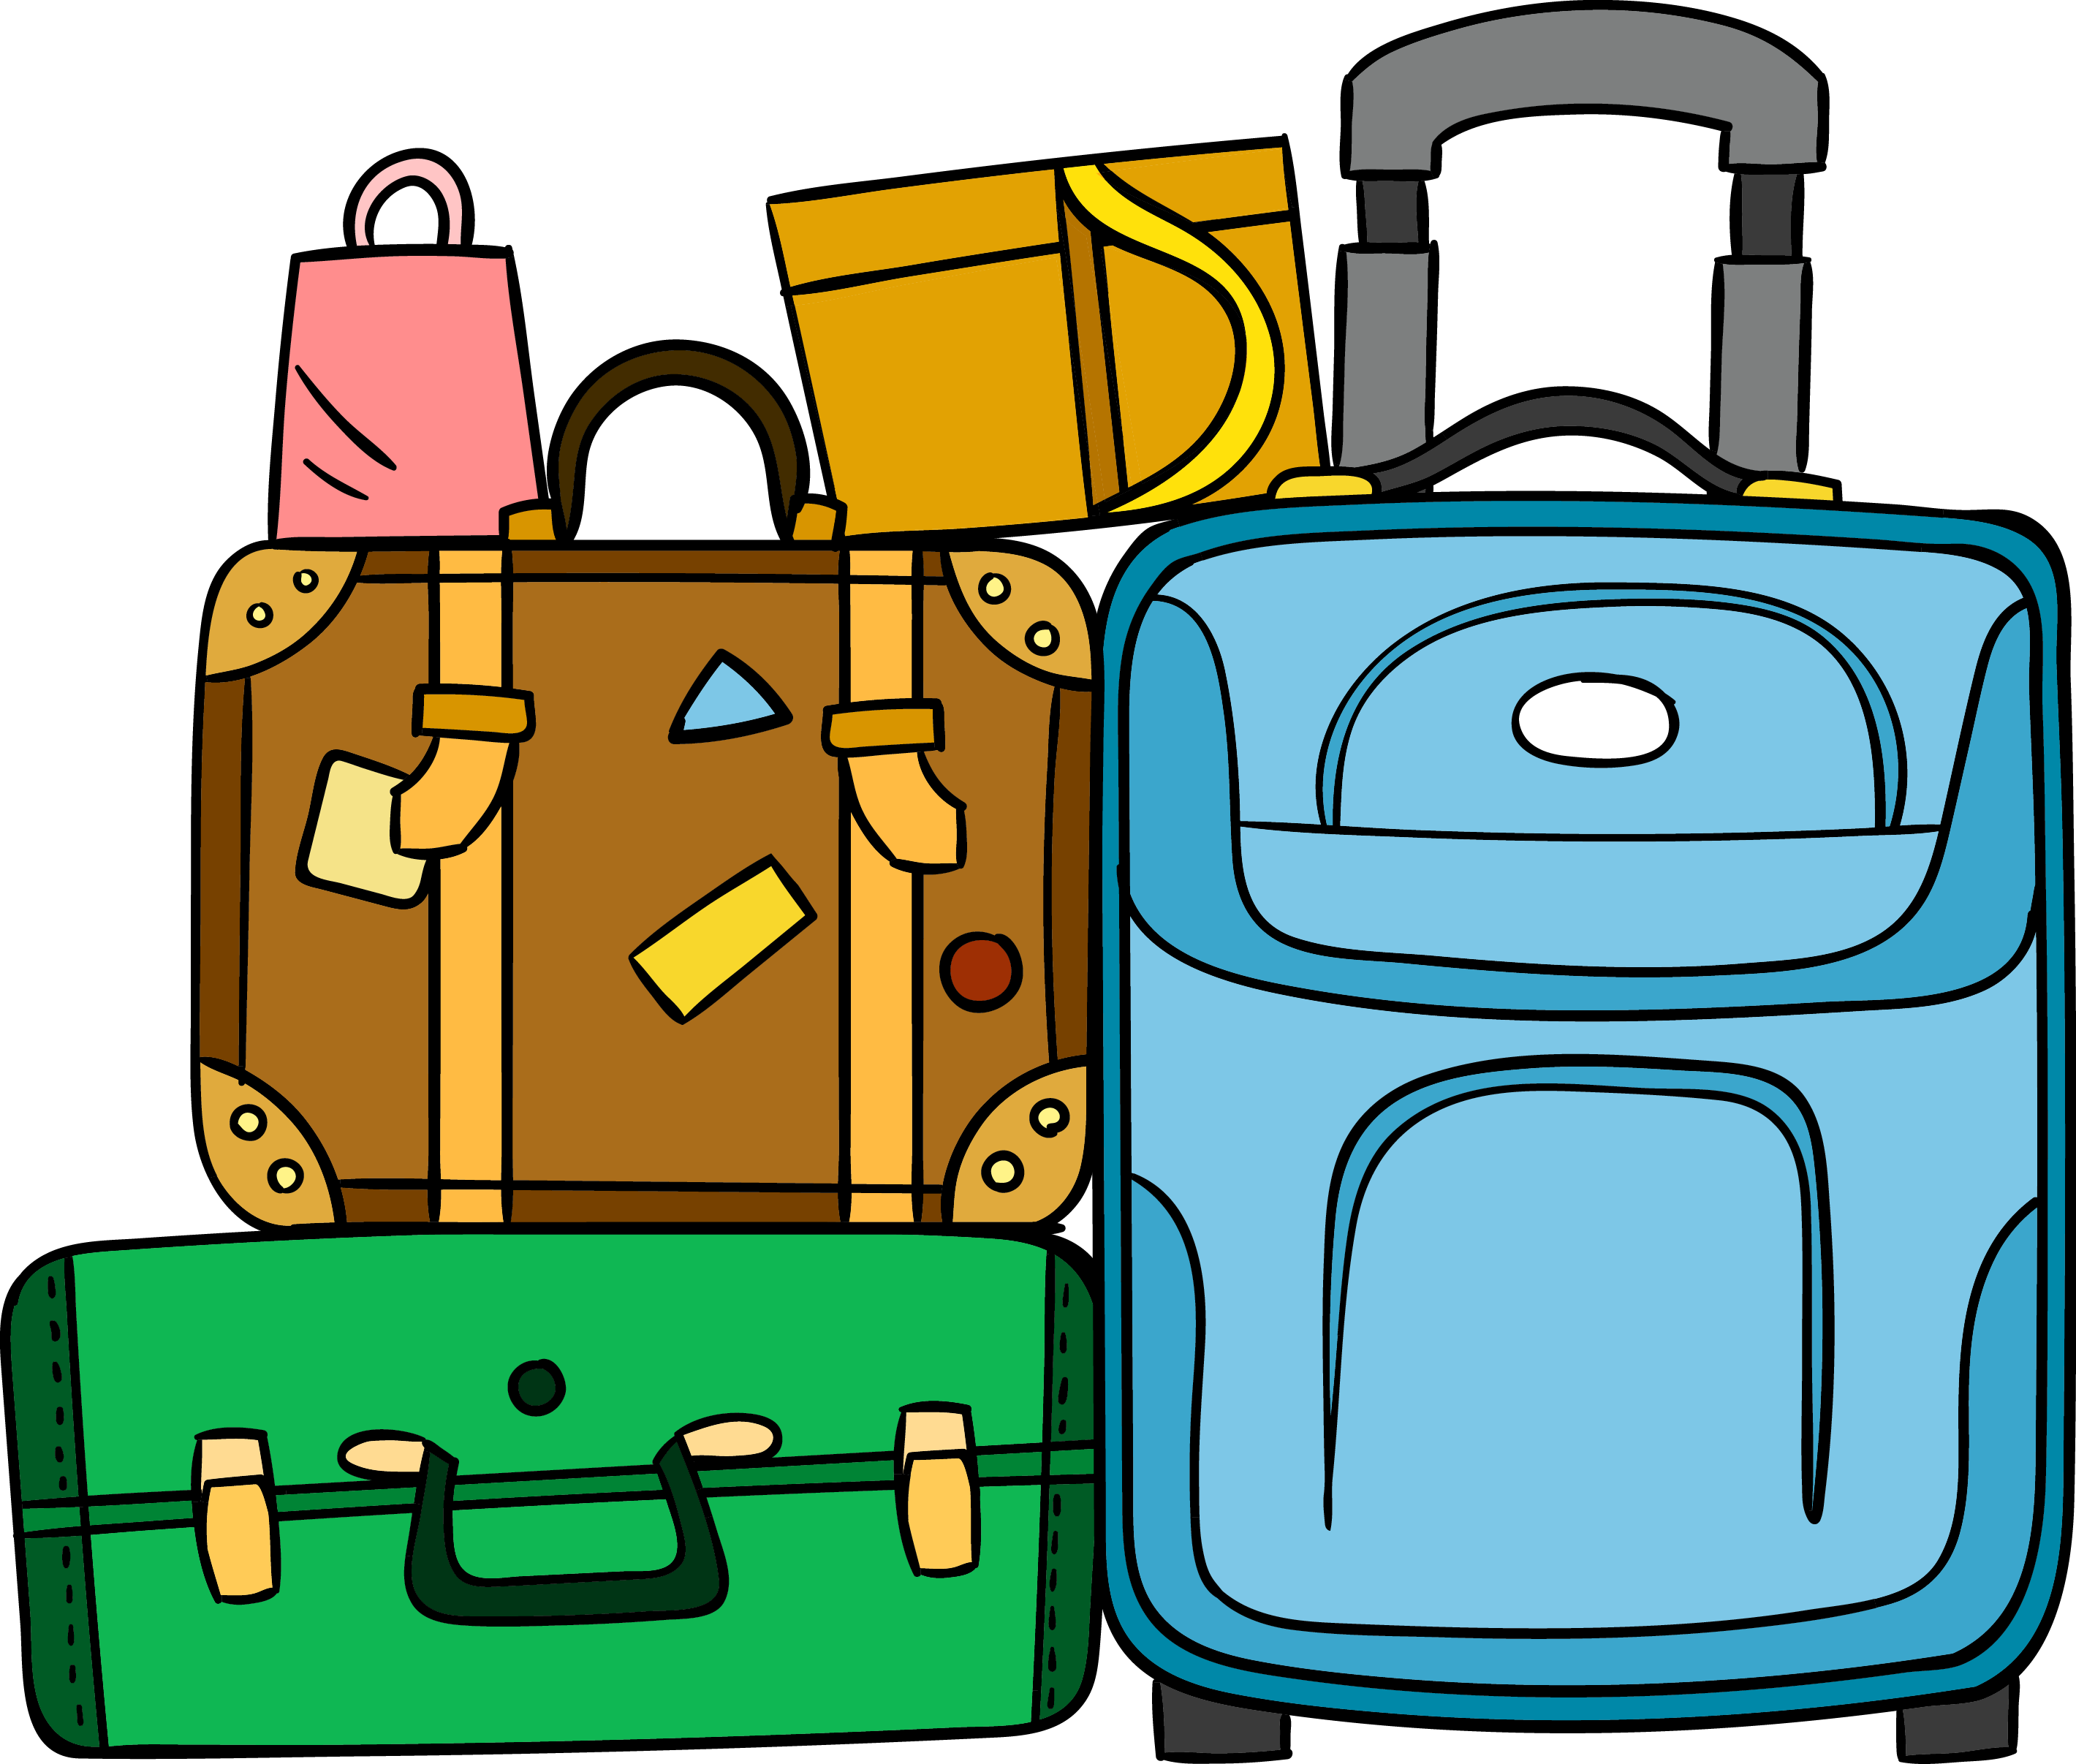 Suitcase Travel Baggage Hand Luggage Clip Art, PNG, 500x500px - Clip ...